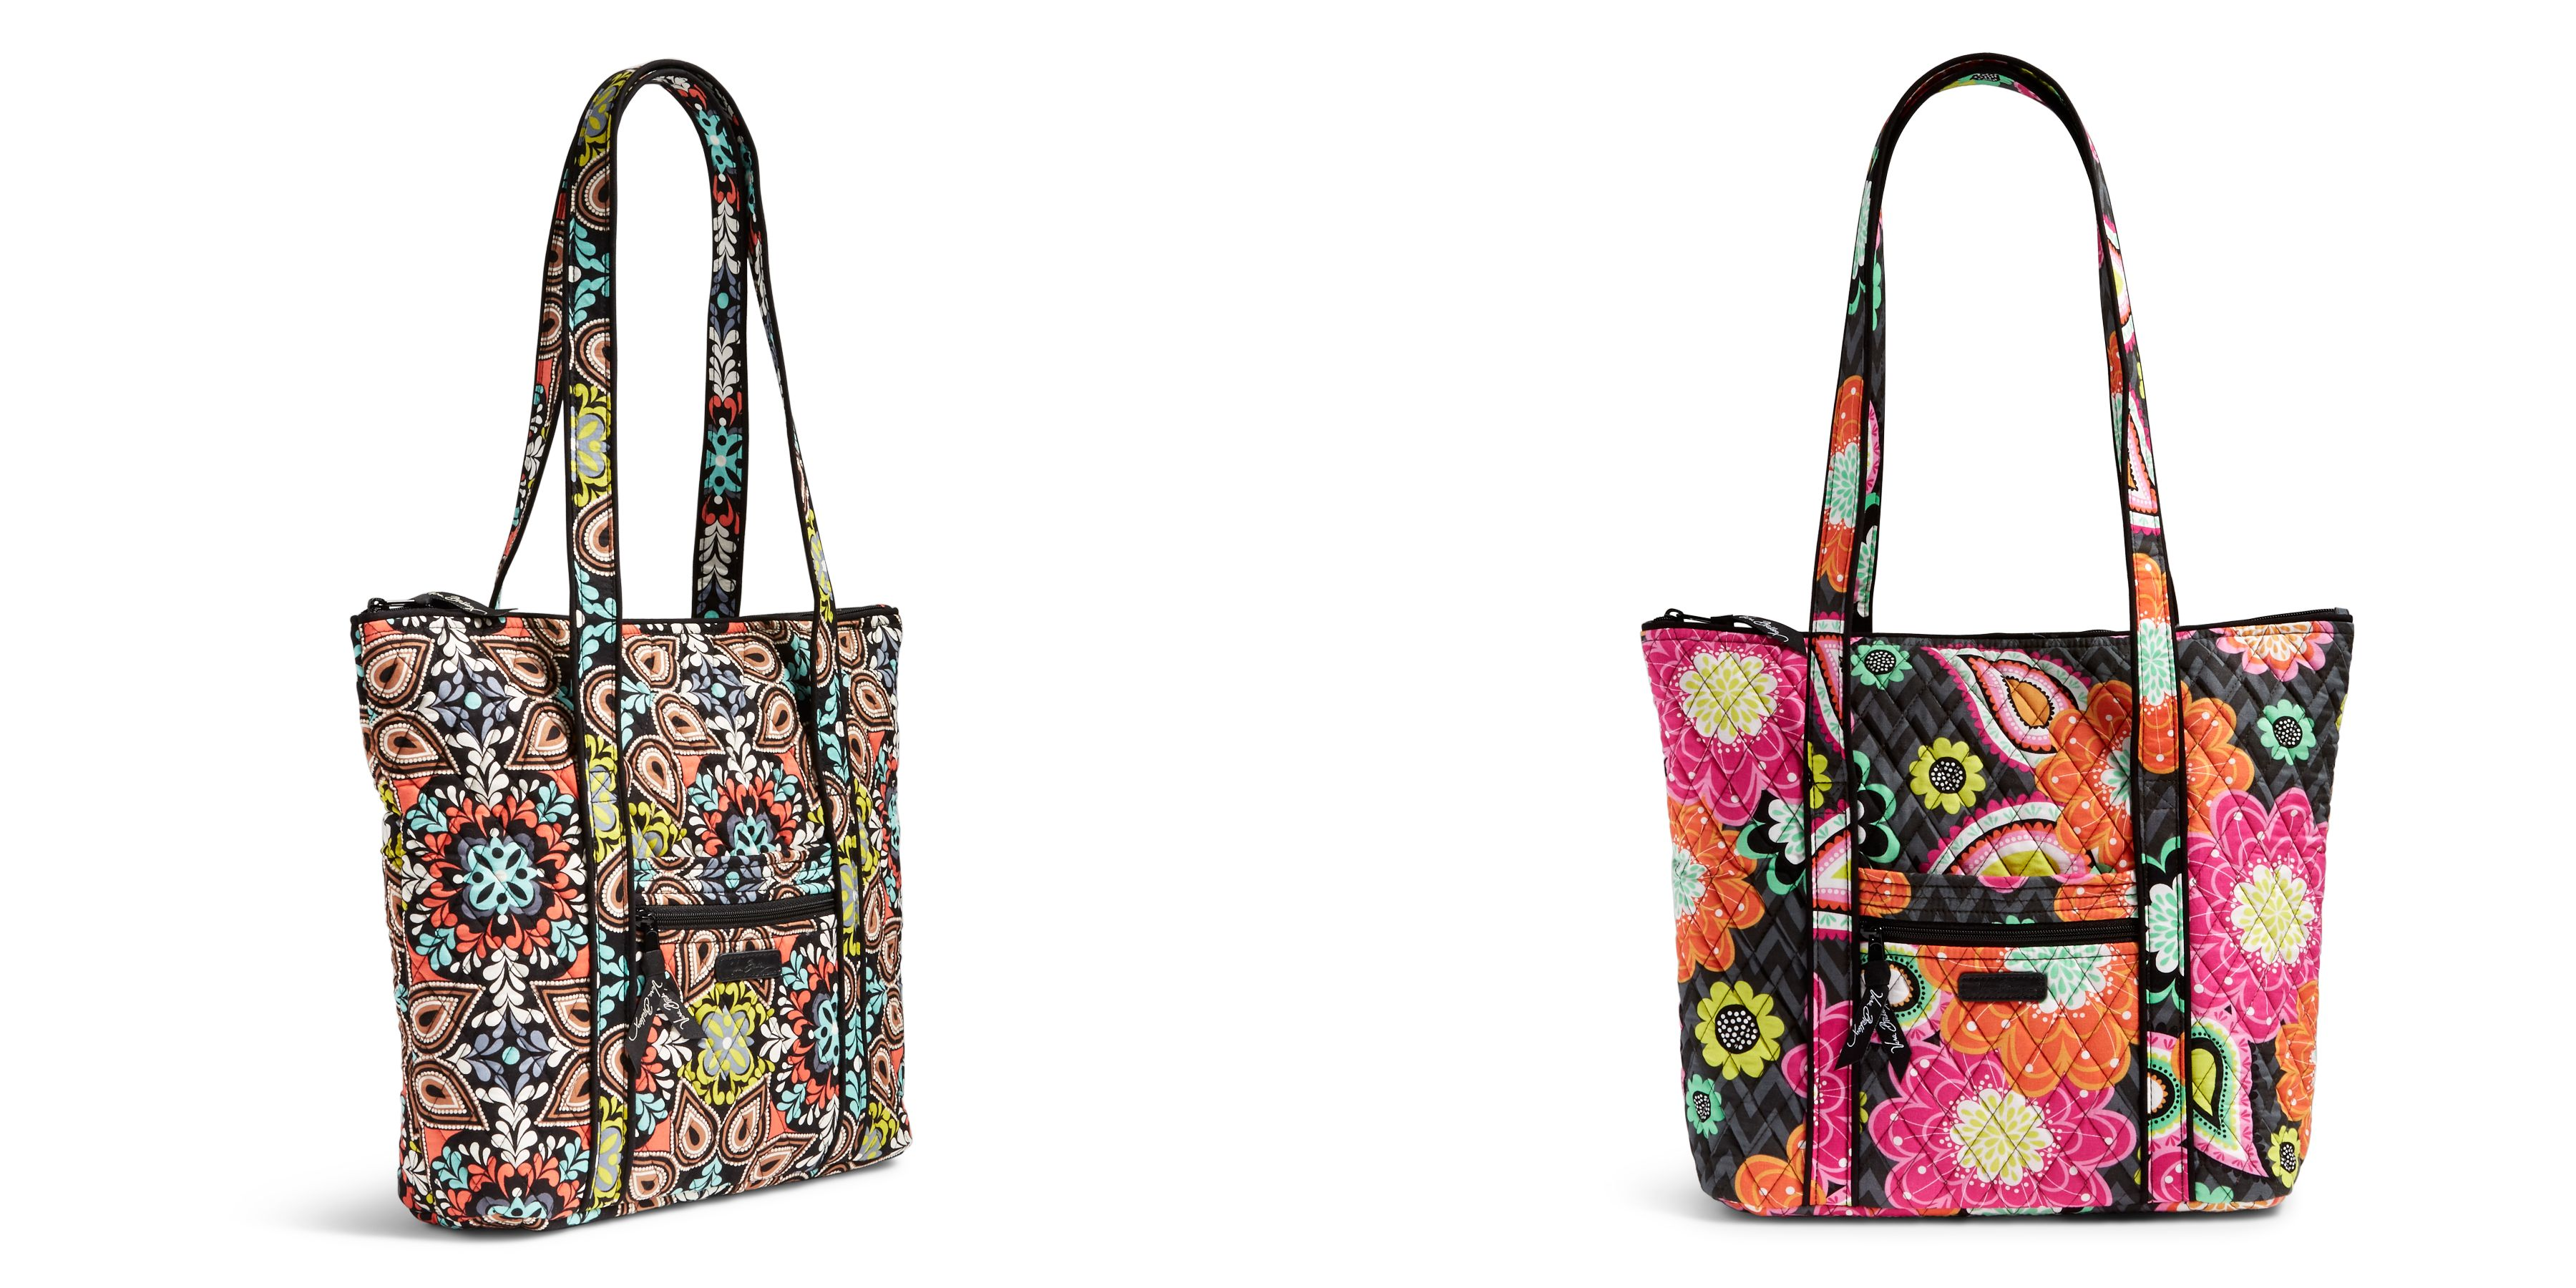 Vera Bradley Villager Tote Down to $13.99 After Extra 30% OFF!!